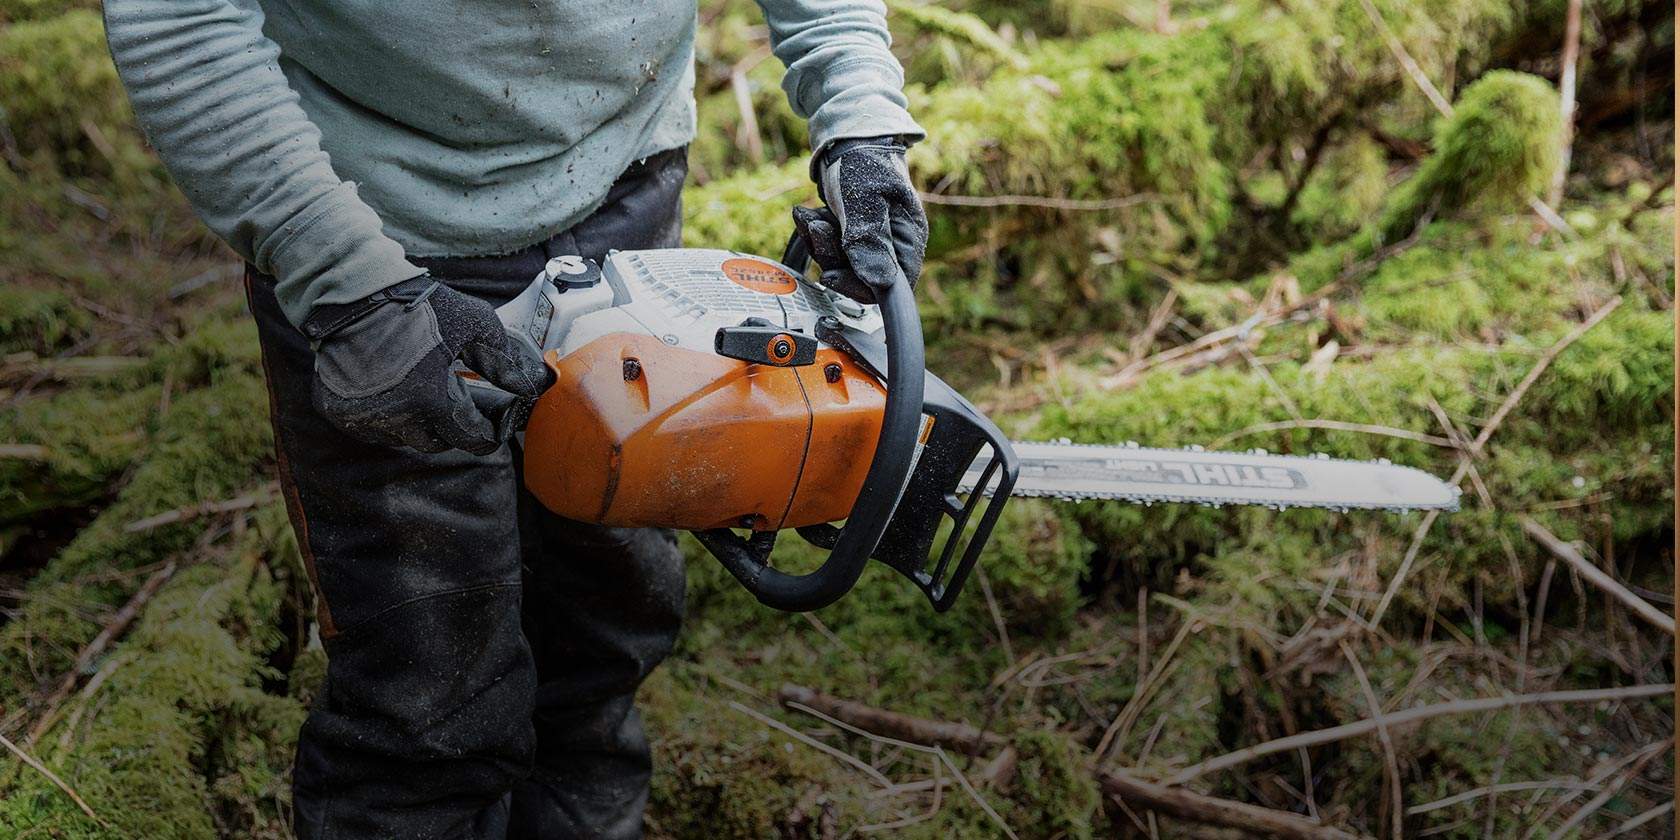 The STIHL MS 462 is easy to maintain, even in the forest. All parts can be removed, cleaned and if necessary, replaced with ease.